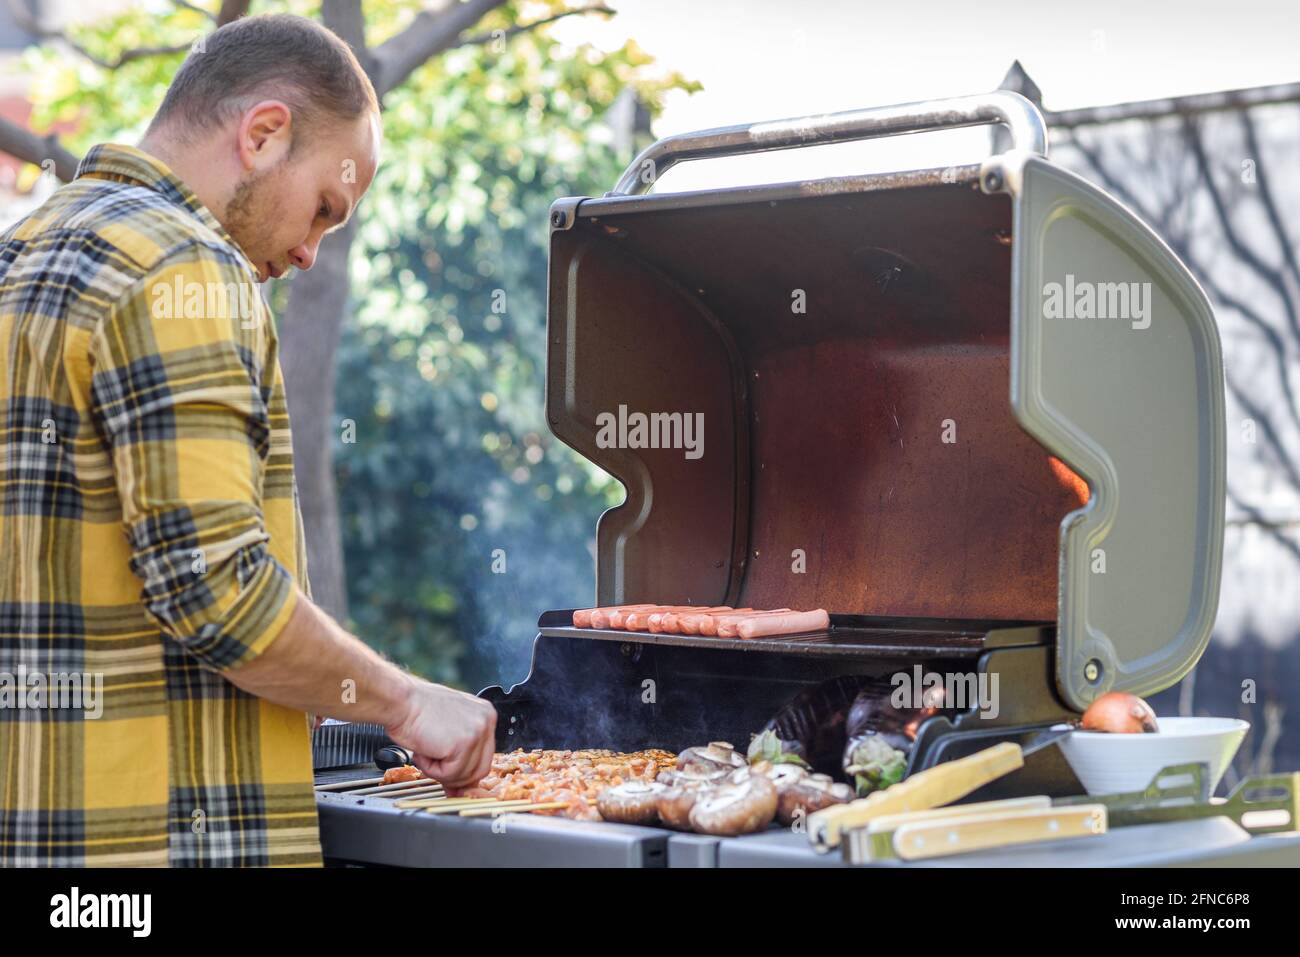 Man outside with bbq. Young man grilling meat skewers, meat steak, eggplant, and mushrooms on a gas grill. Selective focus is on sausage and steak. Stock Photo